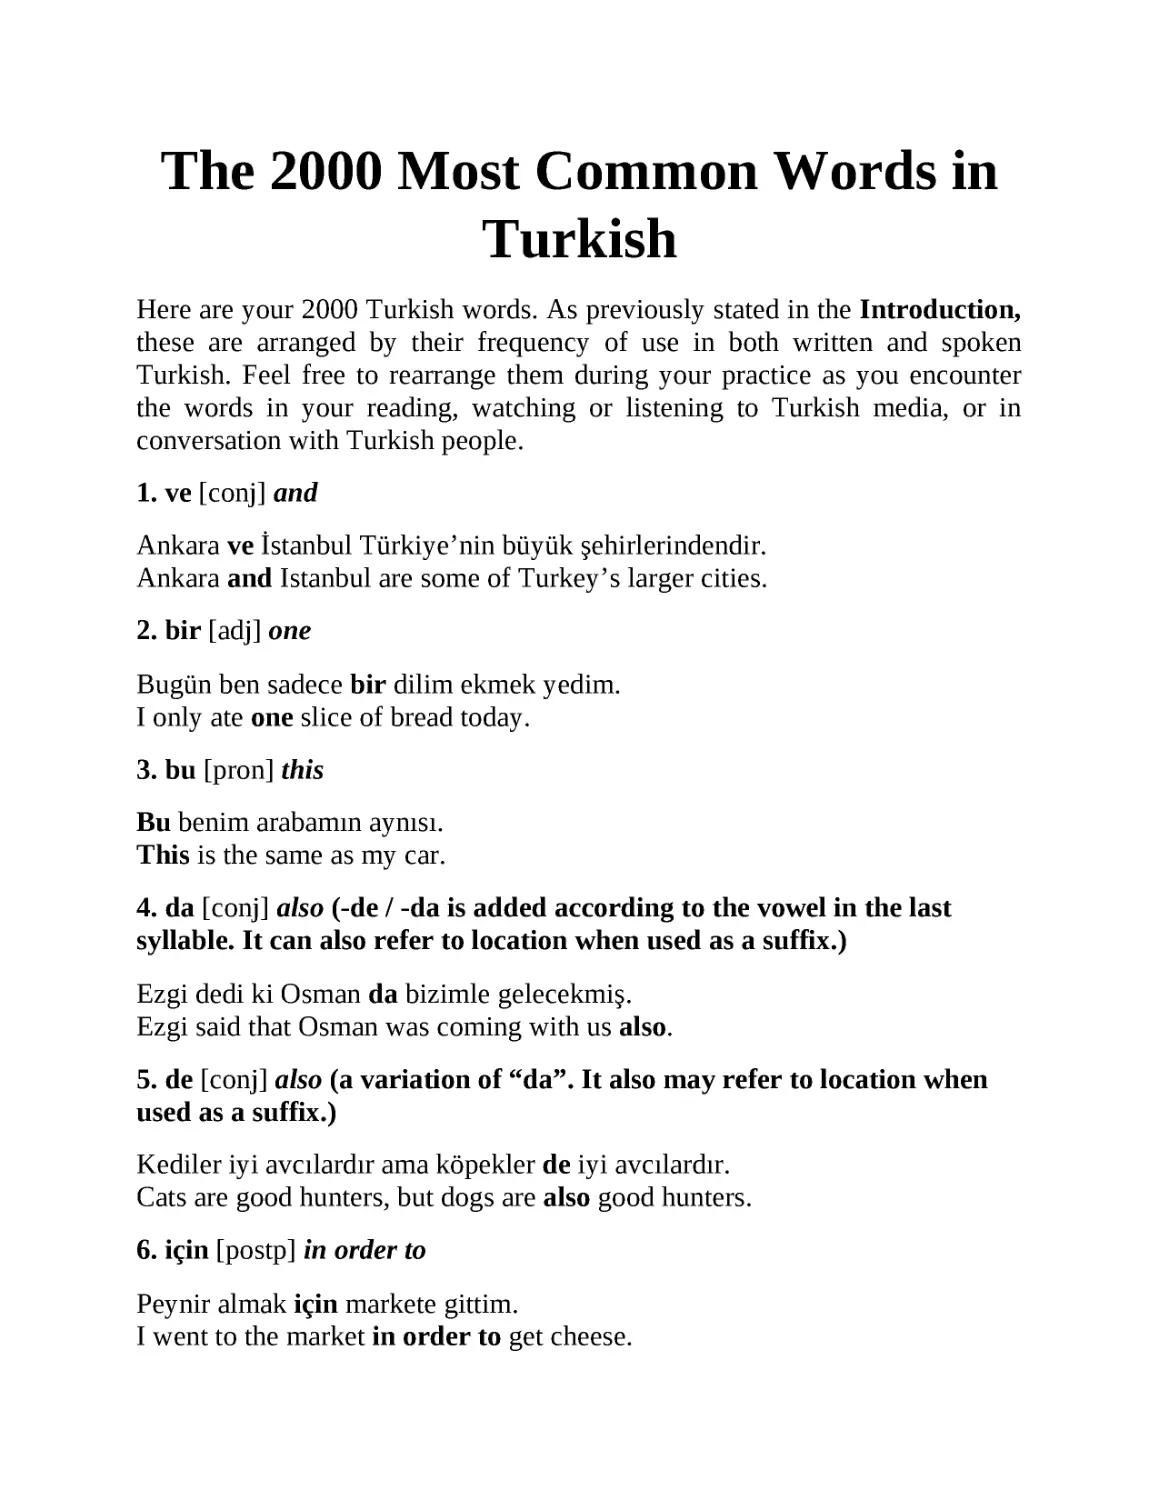 ﻿The 2000 Most Common Words in Turkis